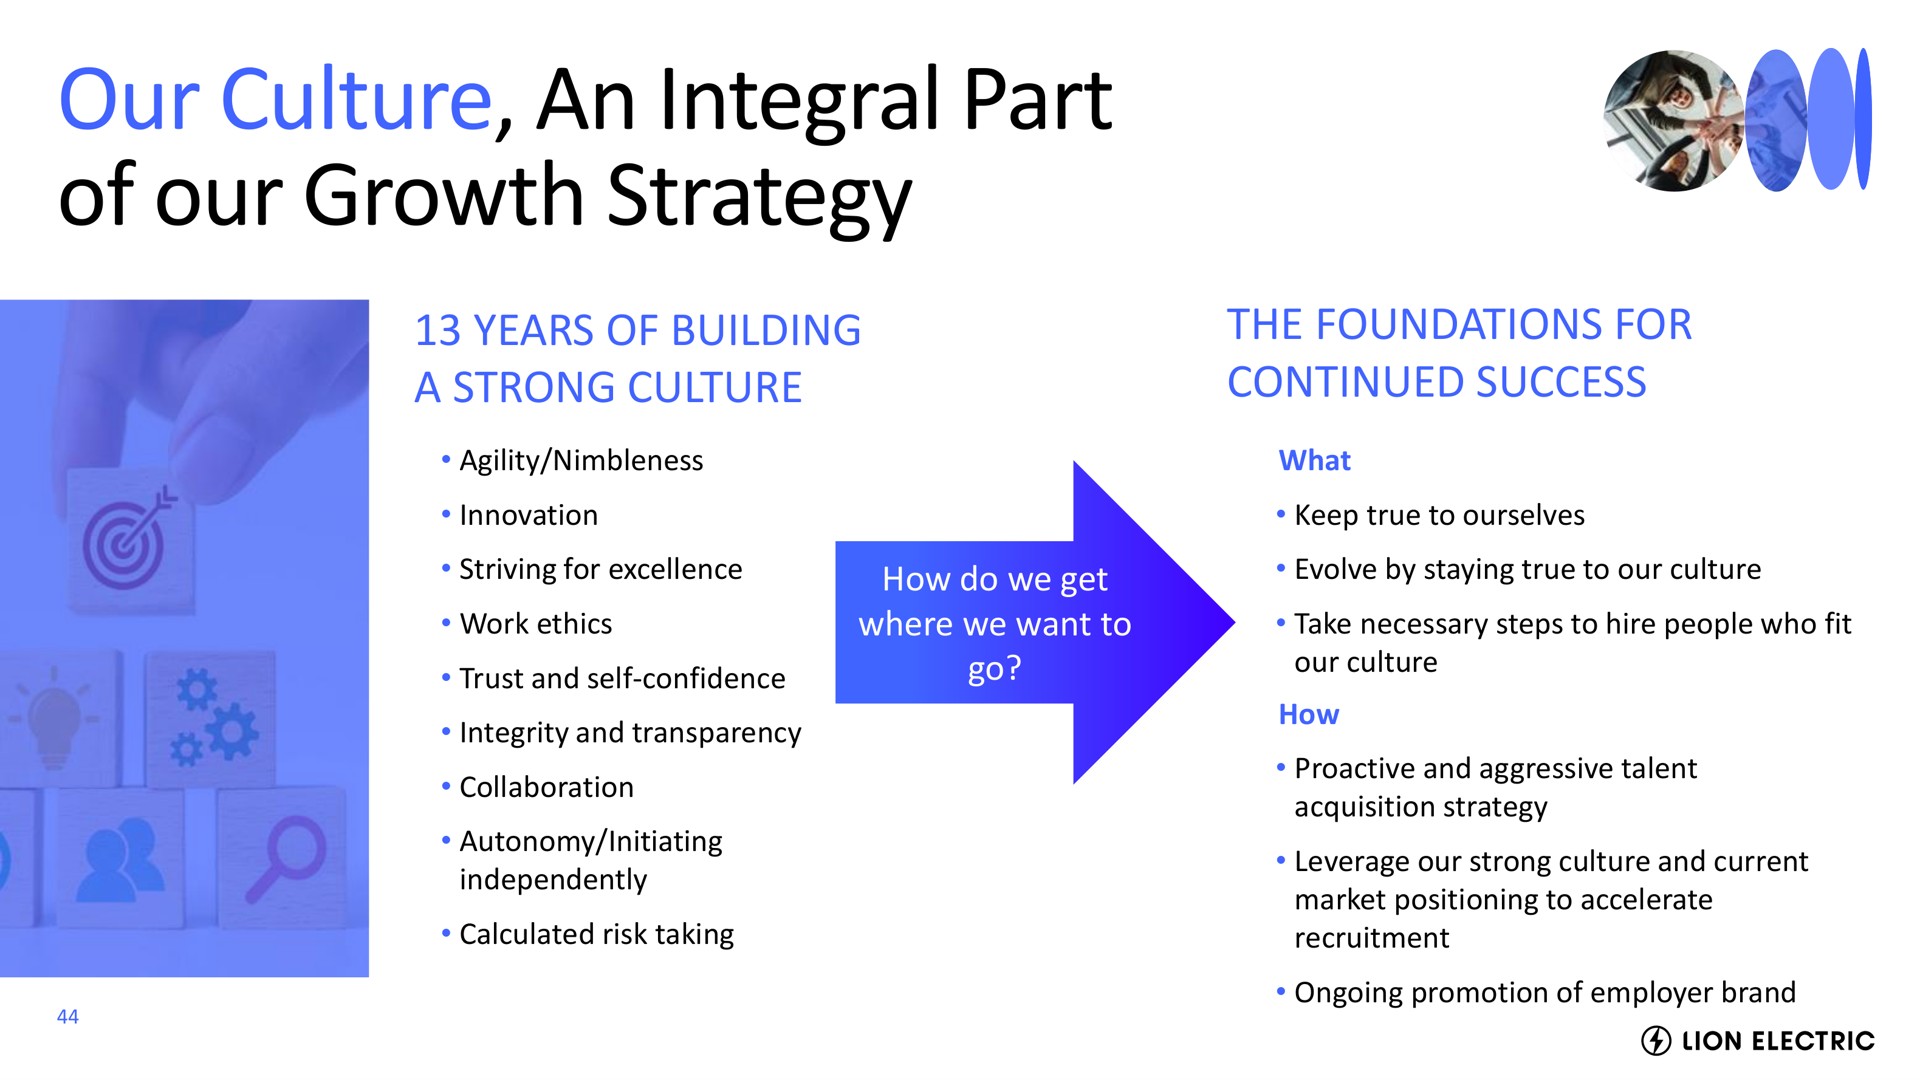 our culture an integral part of our growth strategy | Lion Electric